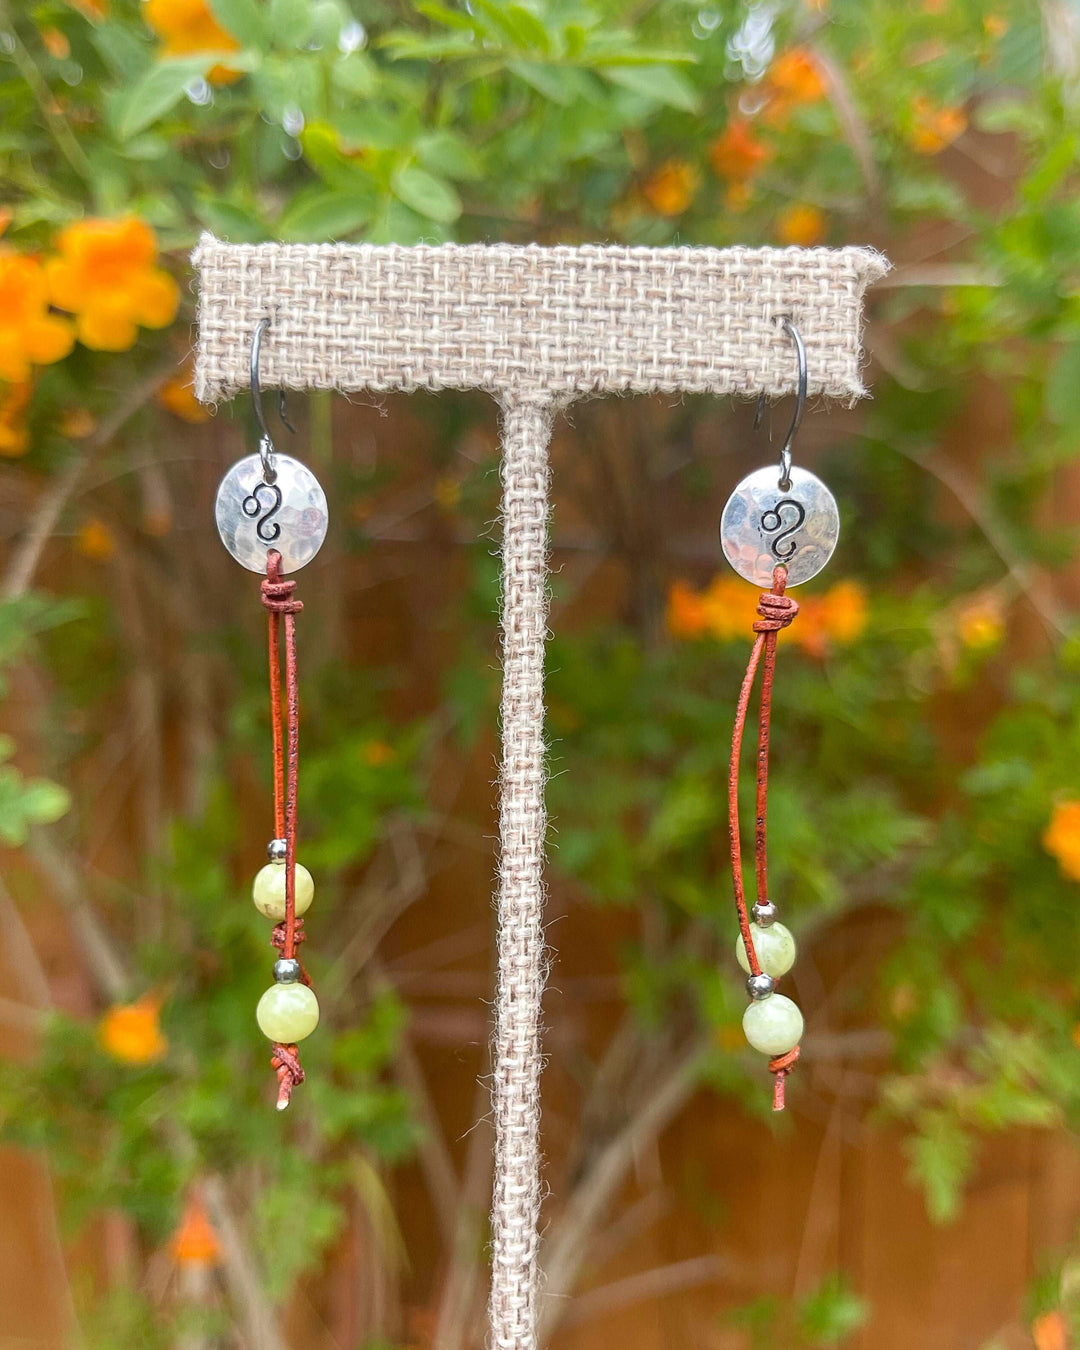 Sterling silver Leo stamped earrings with peridot beads on long leather cord shown outdoors